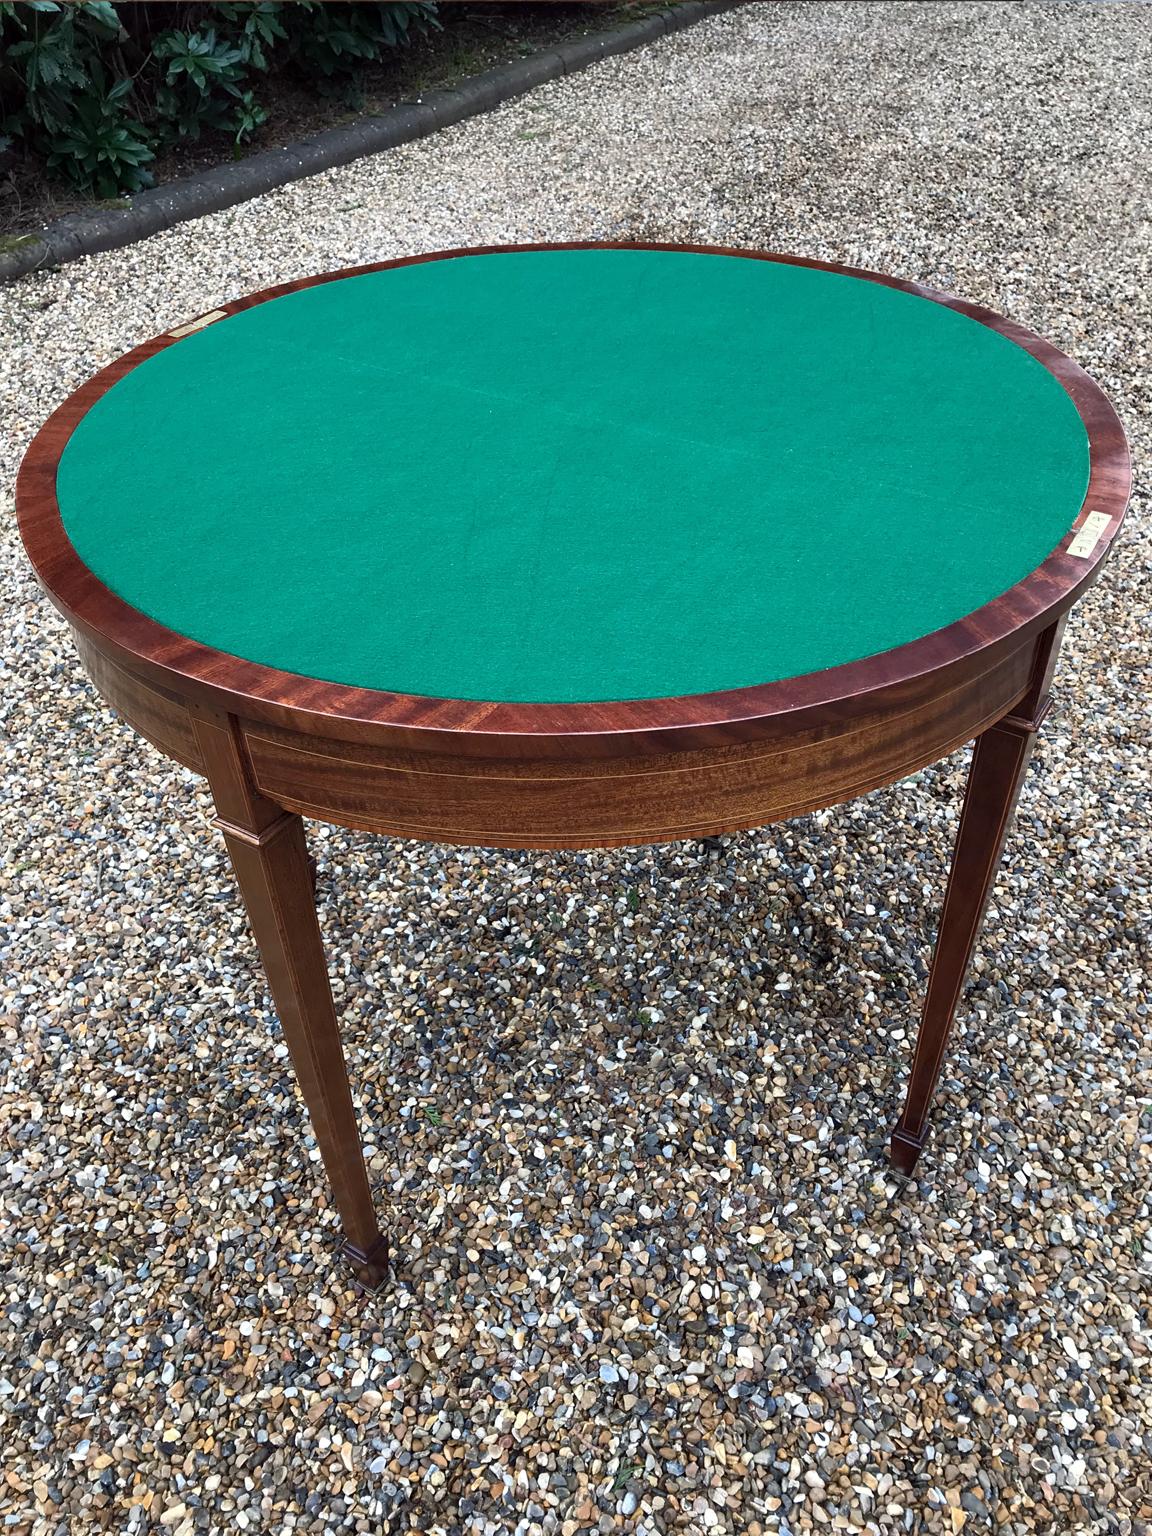 19th Century Mahogany Inlaid Fold-Over Demilune Card Table / Games Table In Good Condition For Sale In Richmond, London, Surrey